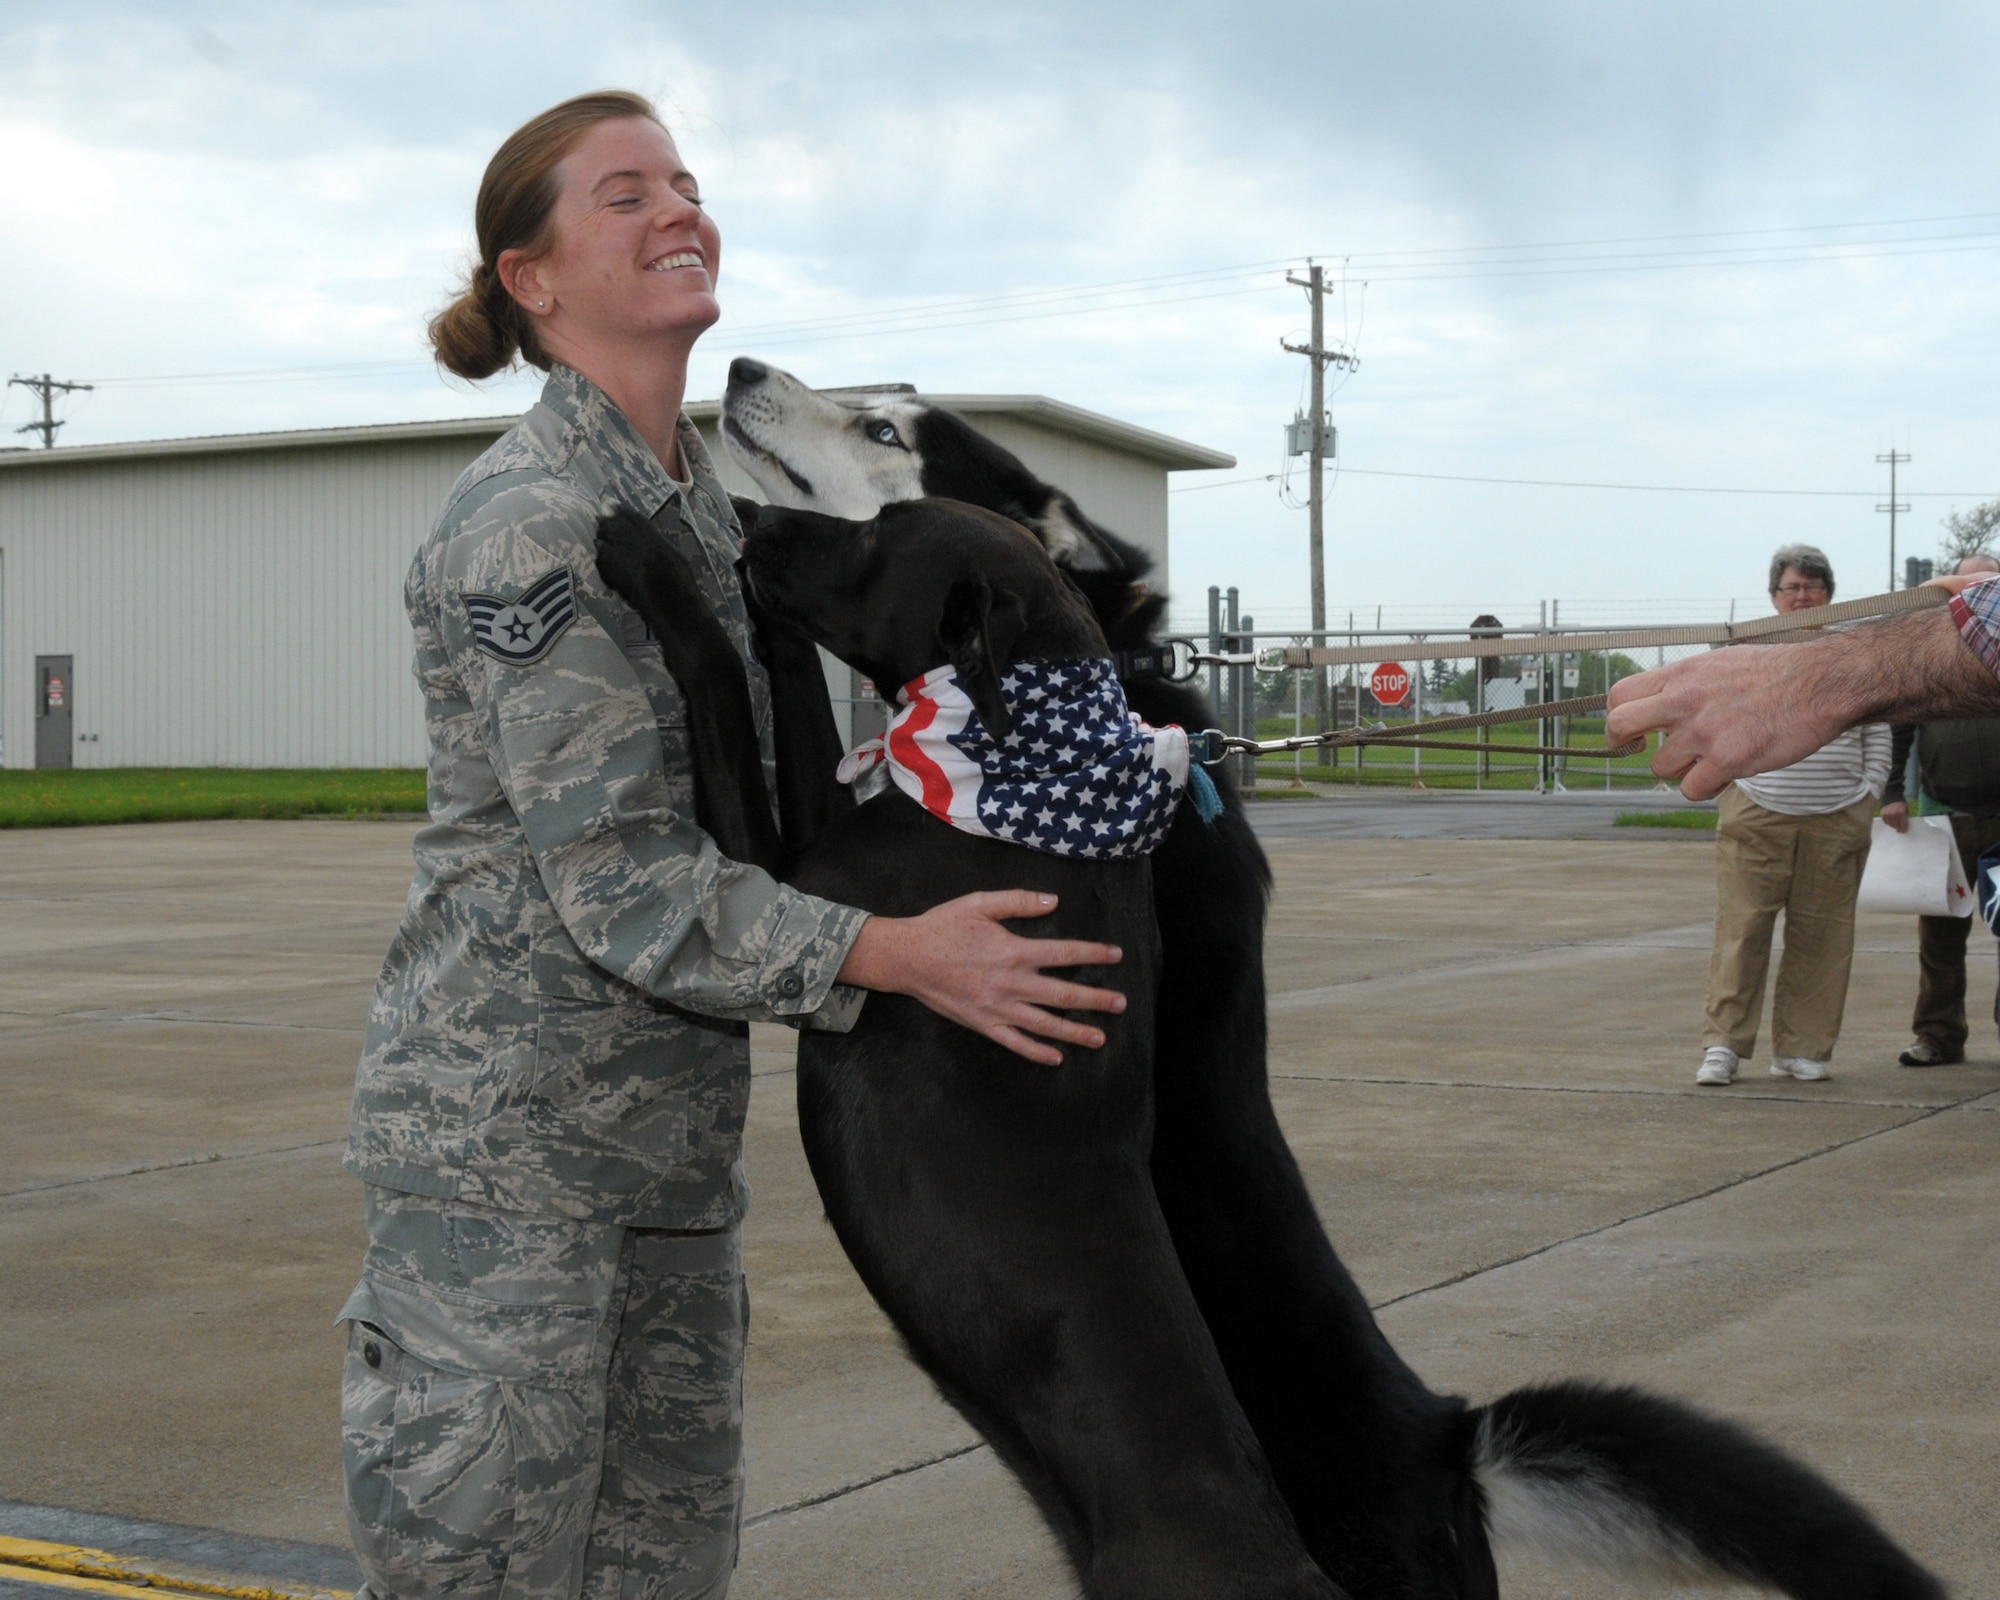 Staff Sgt. Jennifer Trimmer, 914th OSS, aircrew flight equipment specialist receives sloppy kisses from two of her family members  Augey (mixed Lab) and Dagny (Husky)at the Niagara Falls Air Reserve Station, N.Y. May 19, 2014. More than 100 members were deployed overseas recently and have now returned home.  (U.S. Air Force photo by Peter Borys)